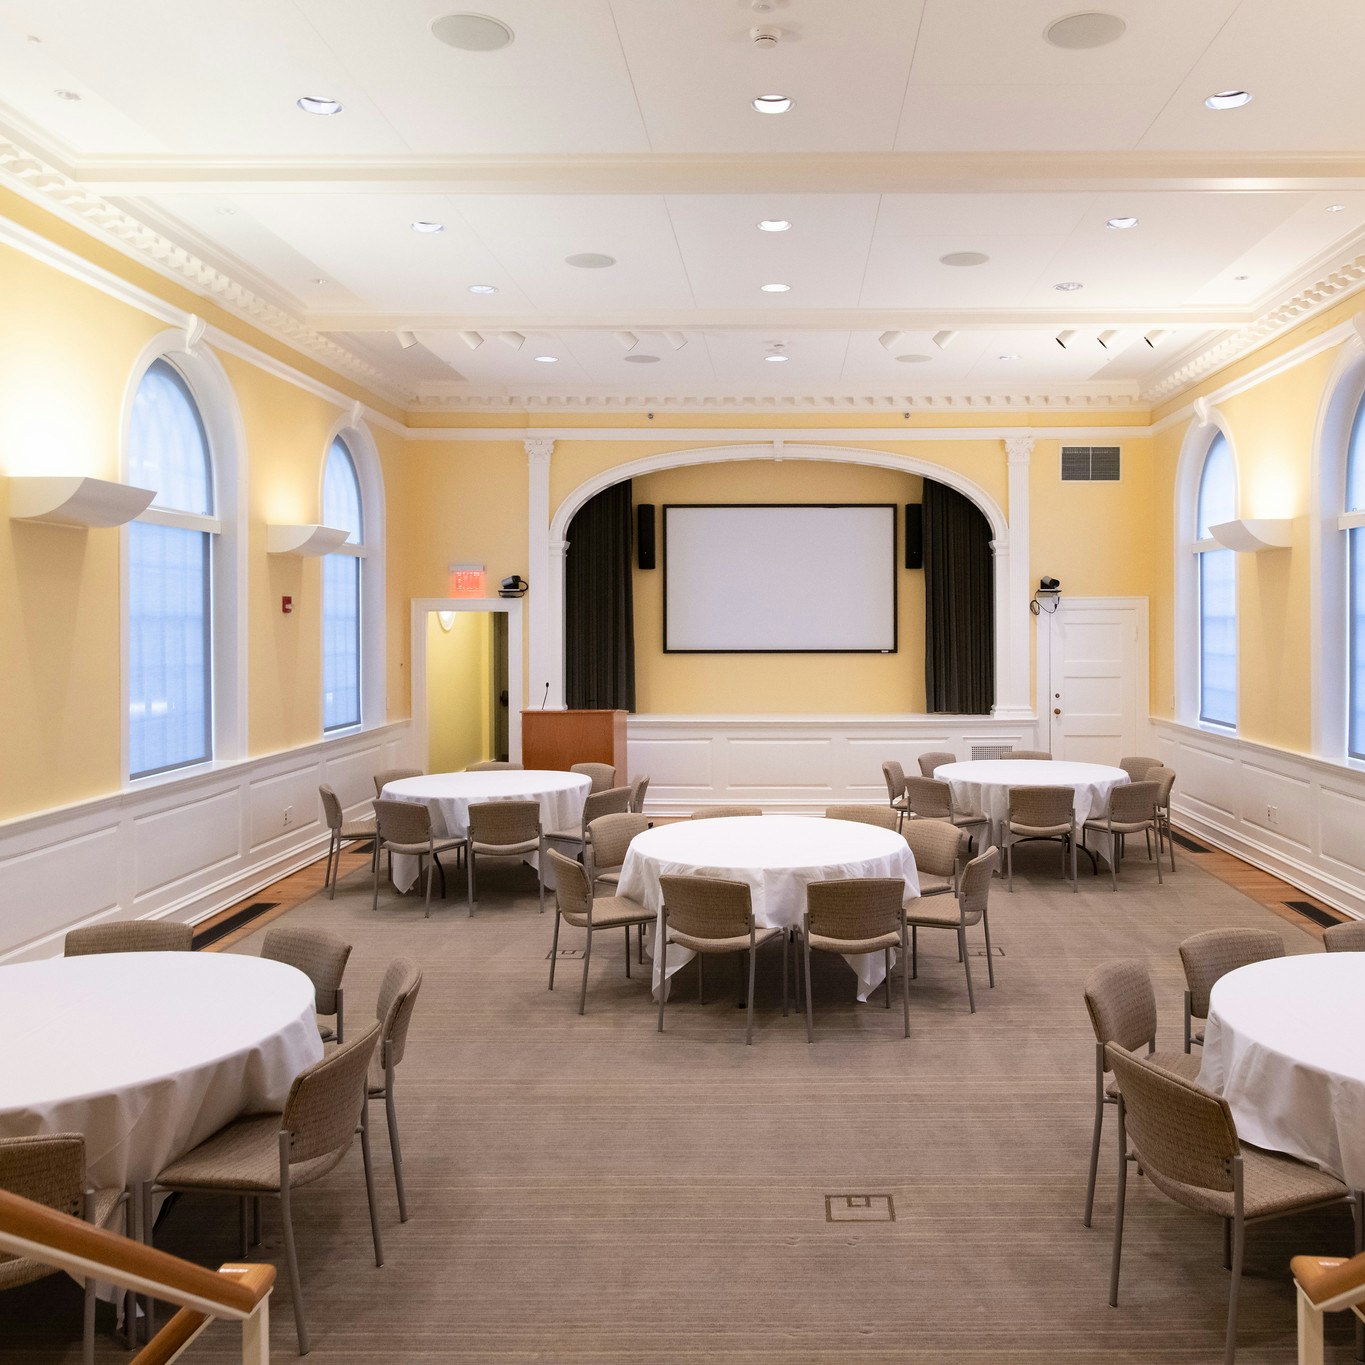 Banquet hall with five circular tables dressed in white table-cloth. Each table seats 8 people. White projector screen is mounted to the wall at the front of the room. View is from the entrance. Walls are yellow.